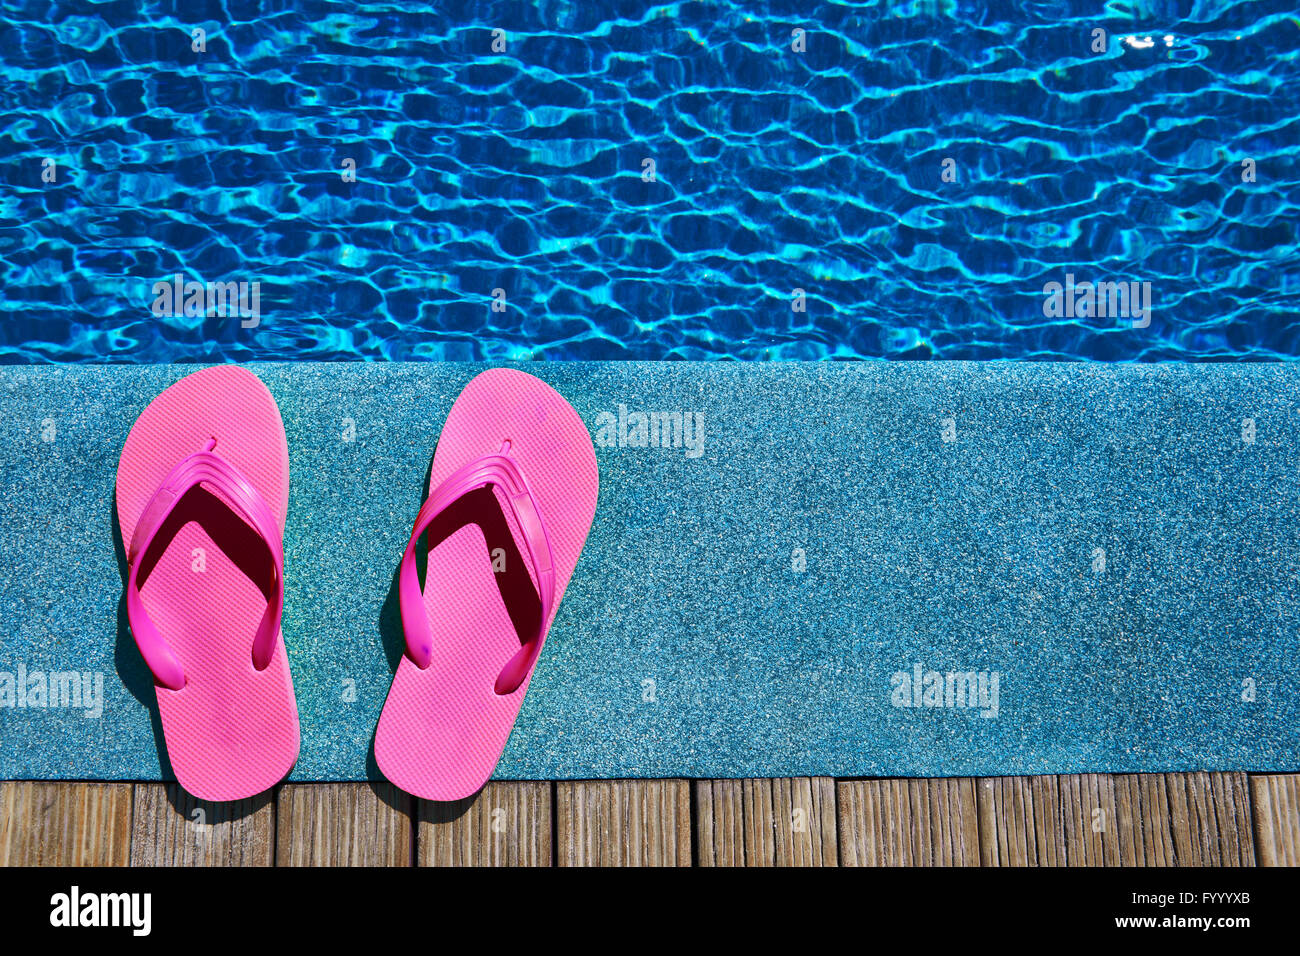 Slippers by swimming pool Stock Photo -